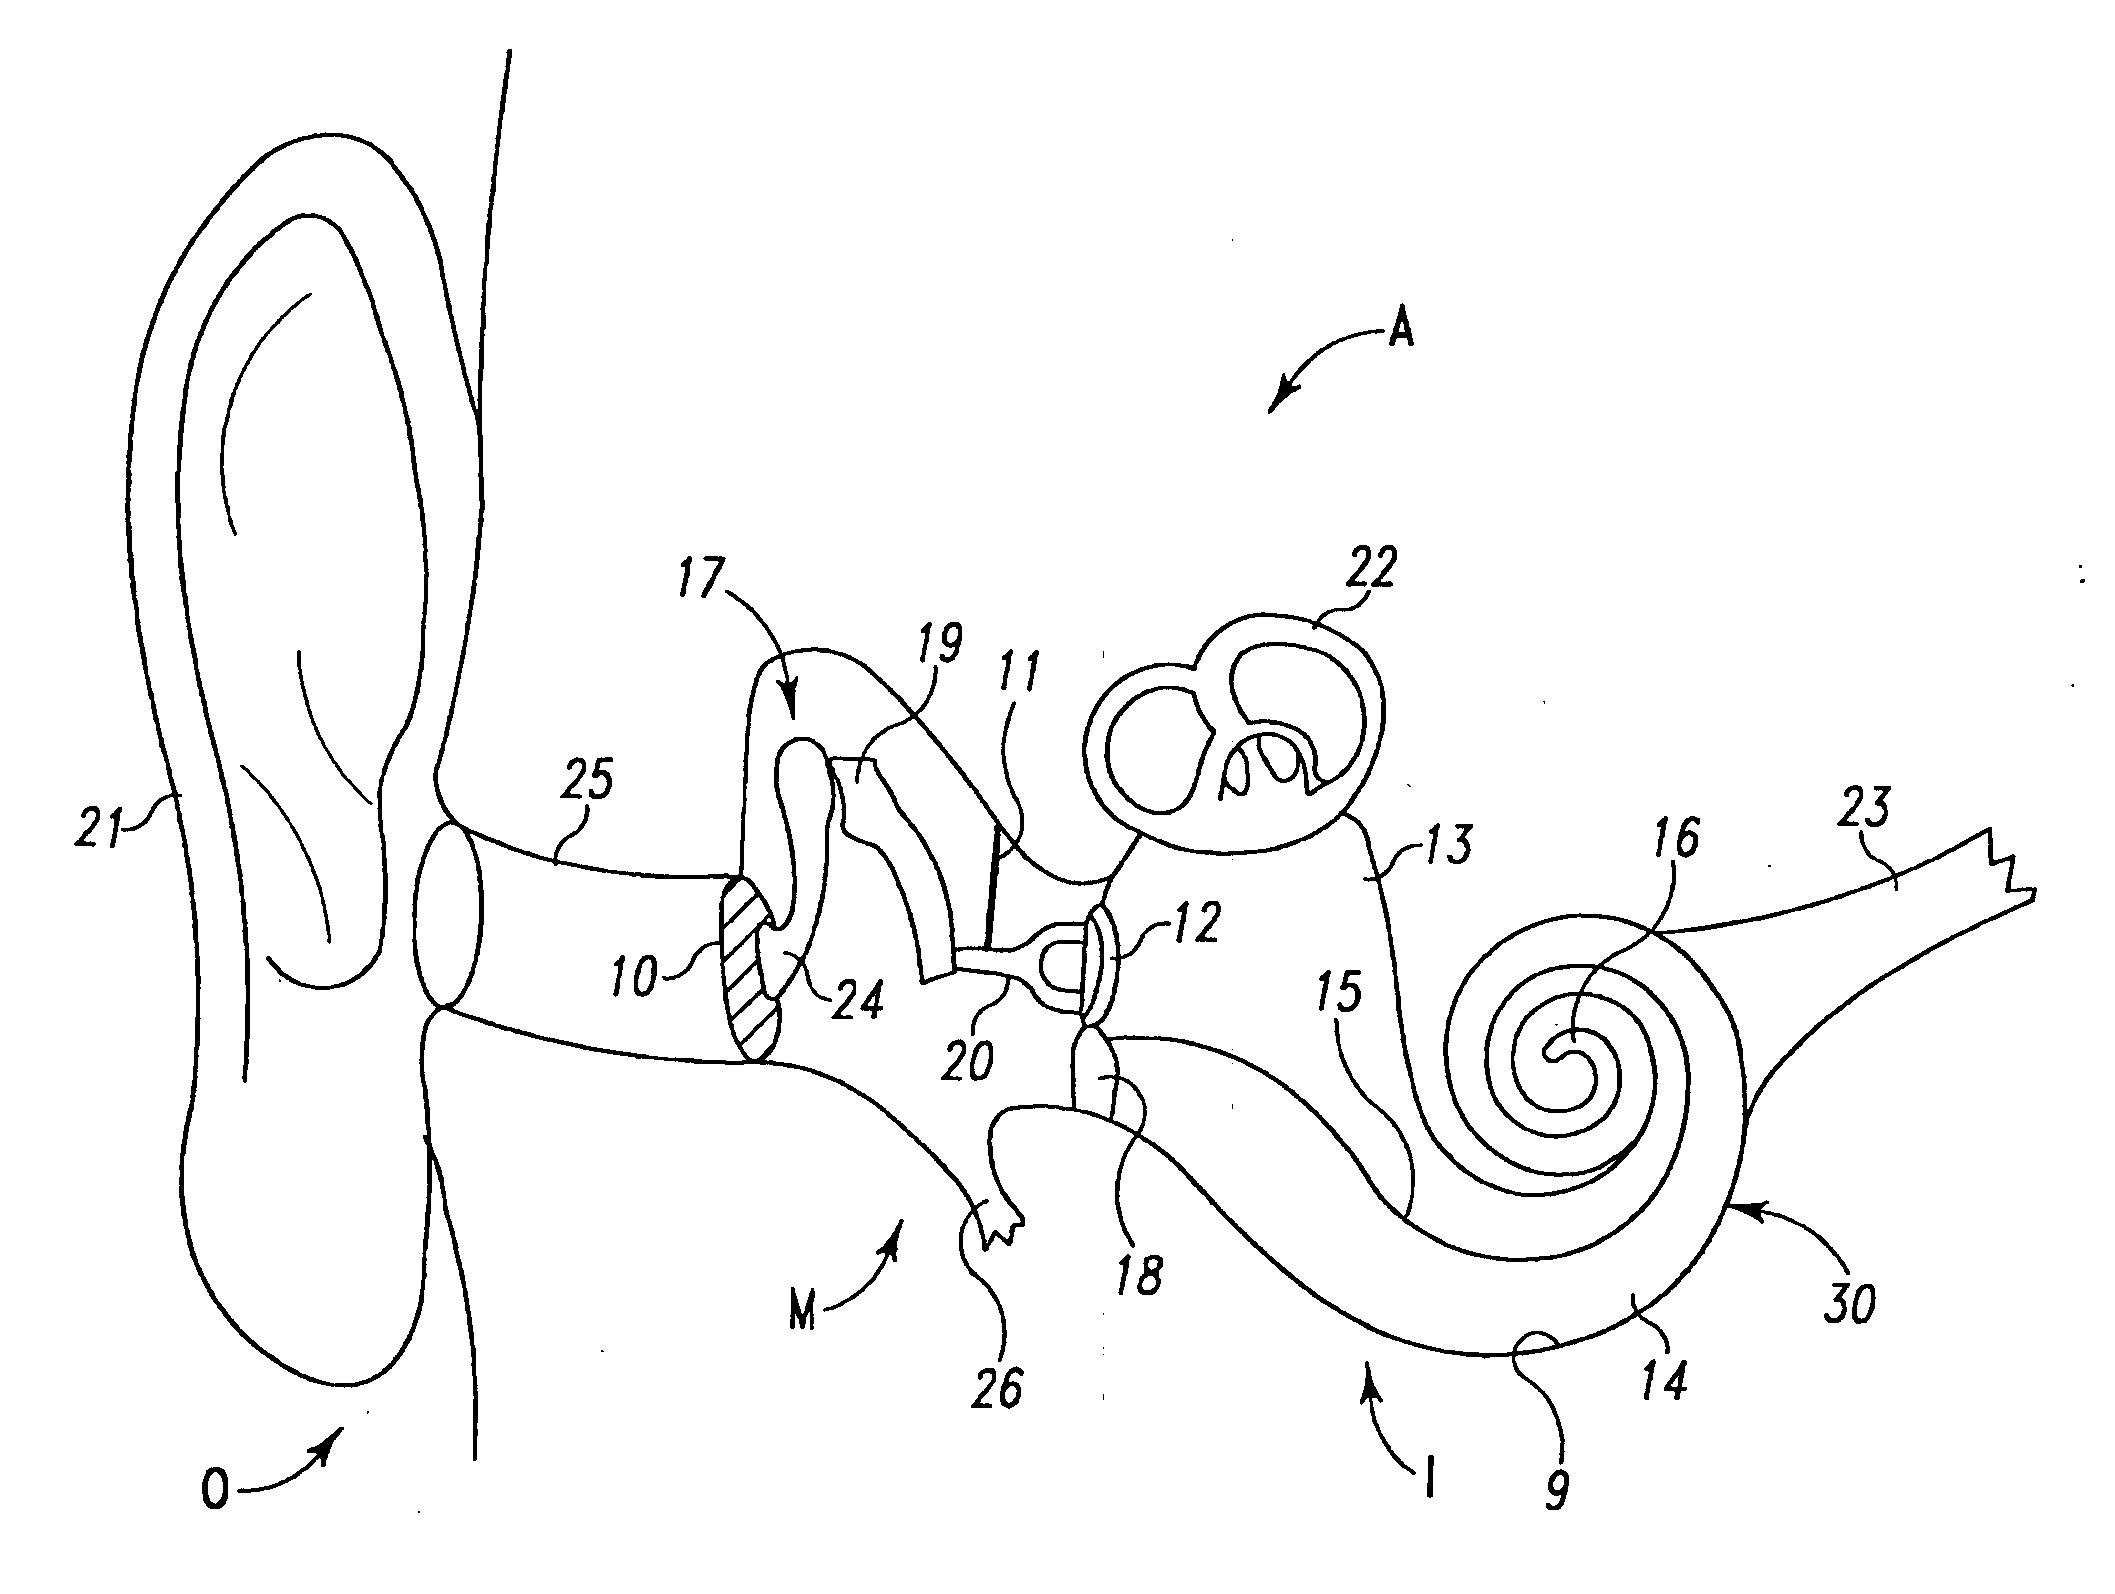 Extra-cochlear implanted hearing aid device